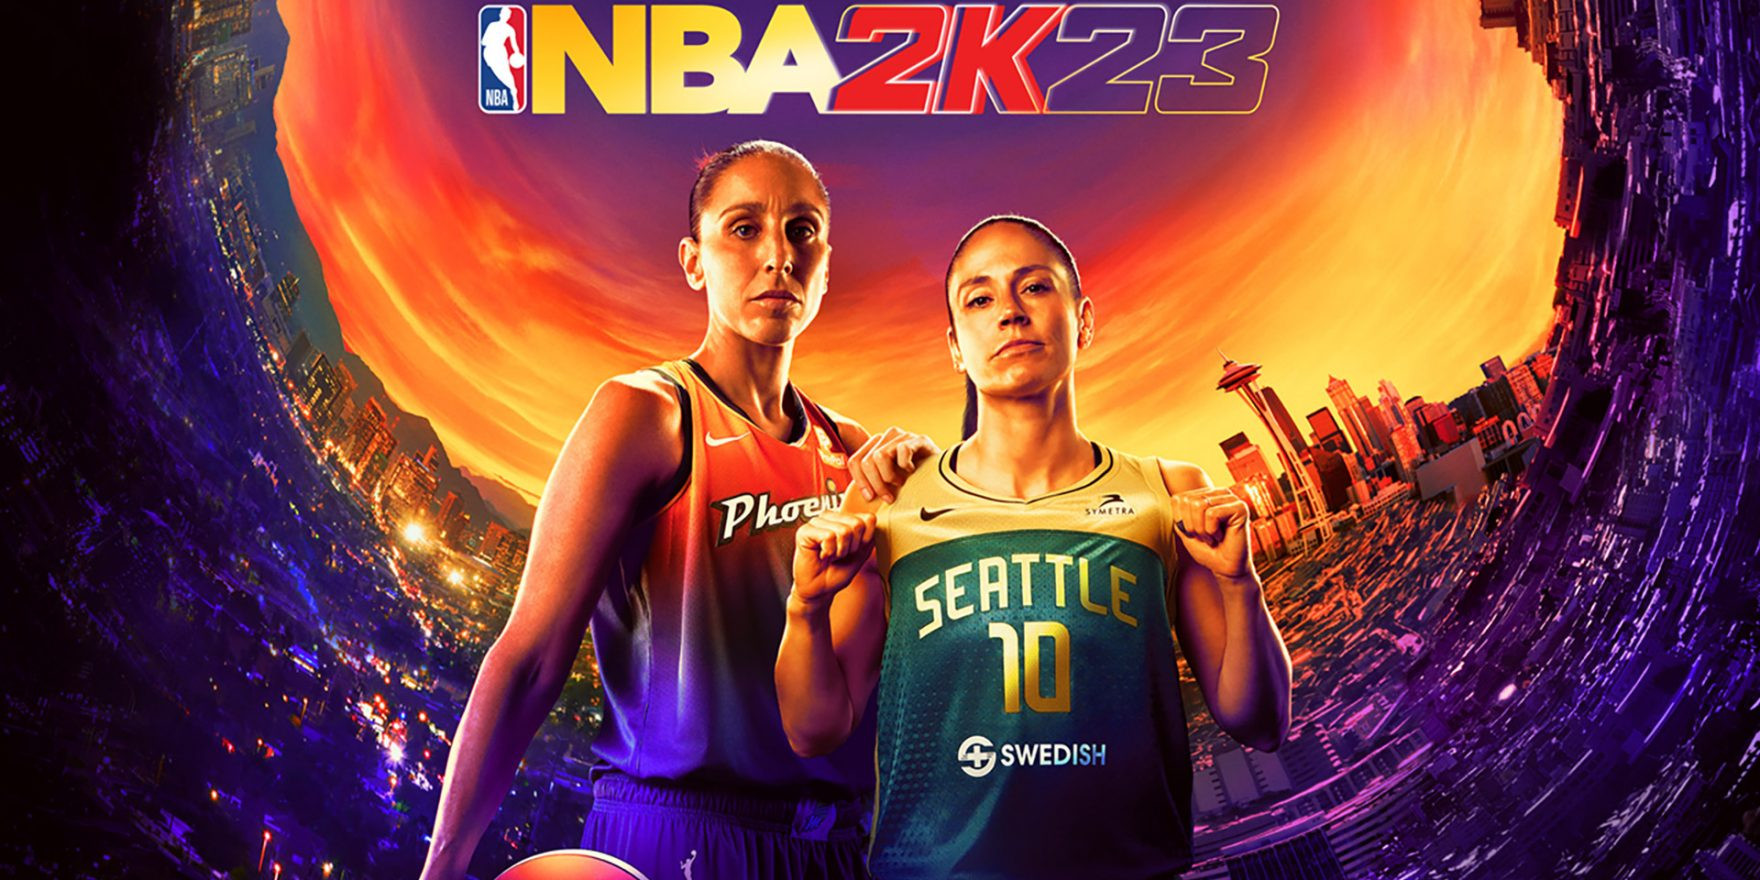 NBA 2K23 - The Year of Greatness!